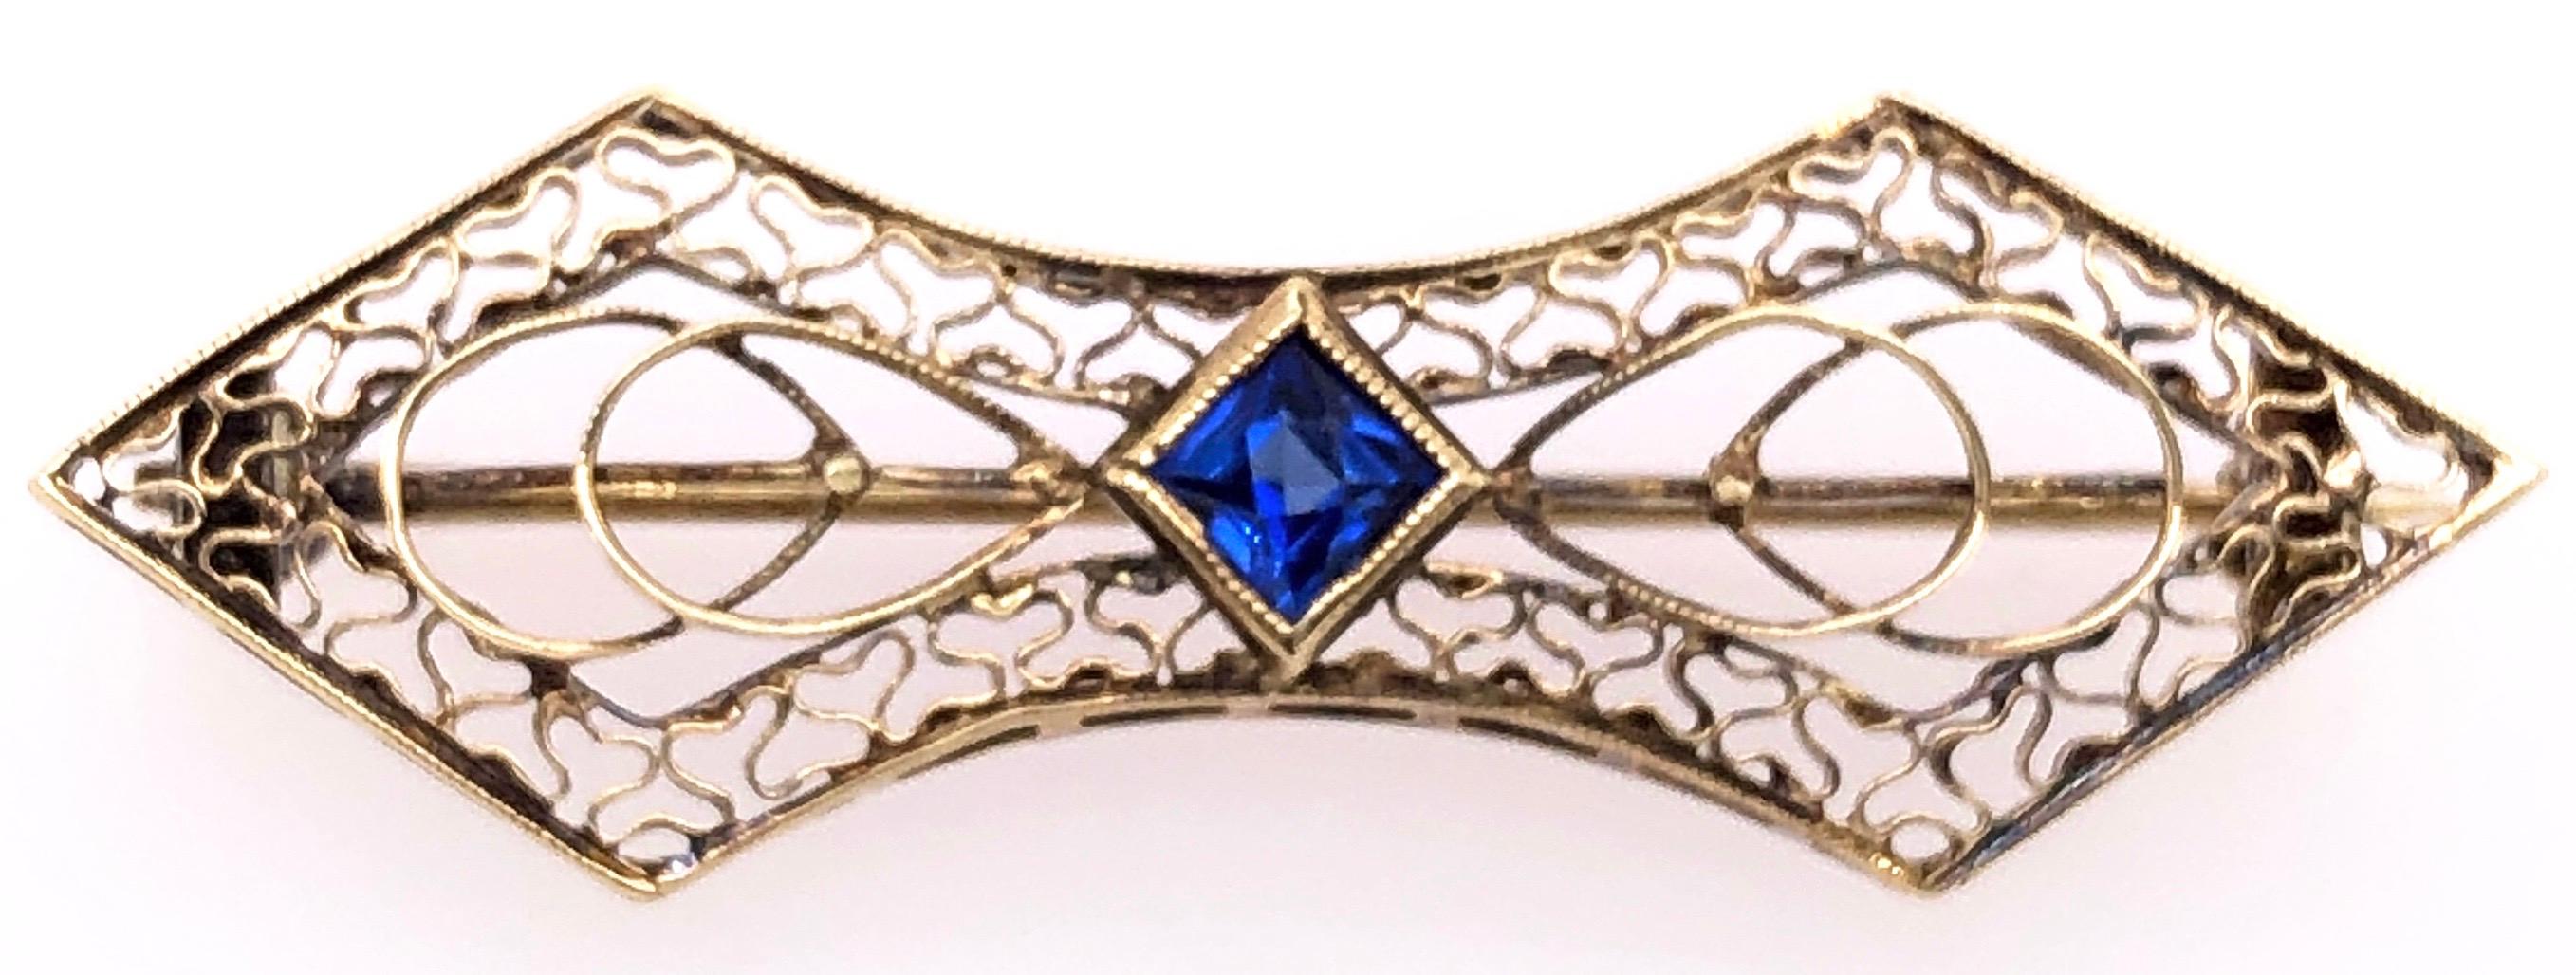 14 Karat Yellow Gold with Sapphire Center Stone Filigree Brooch For Sale 3